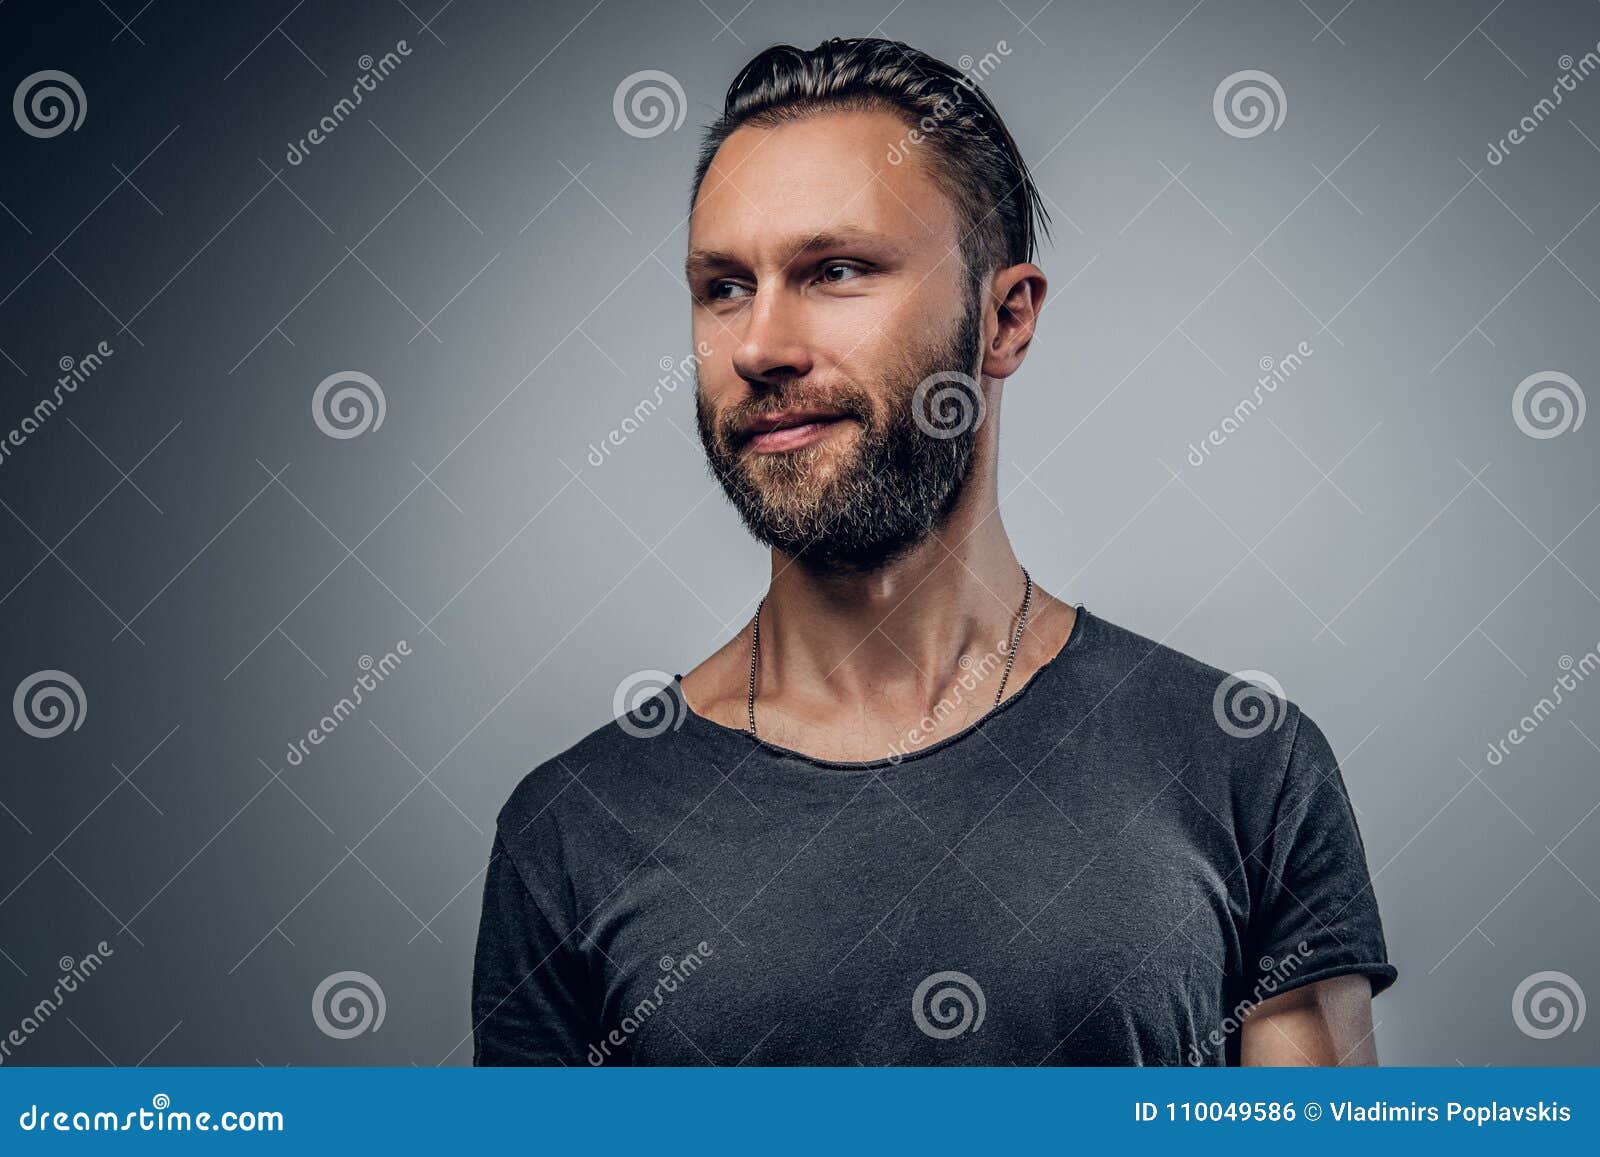 Beard Male in Grey T Shirt. Stock Photo - Image of athletic, homosexual ...